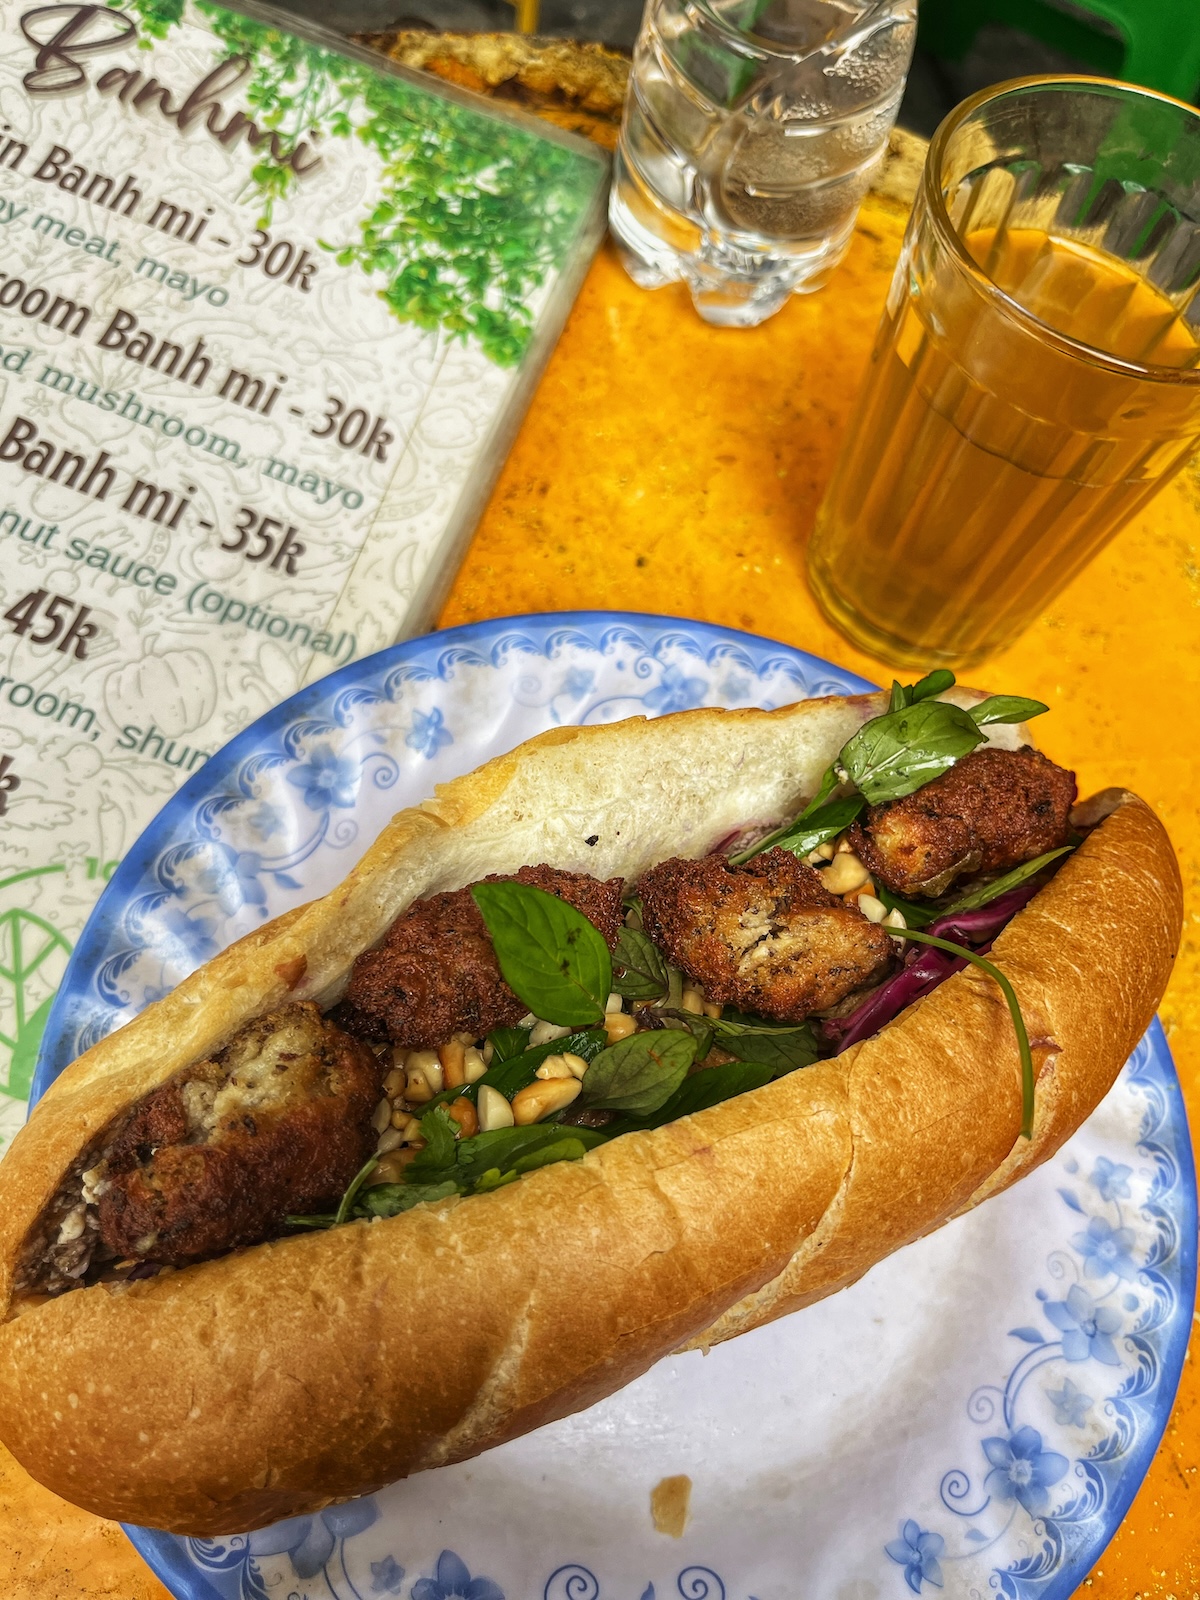 An open sandwich baguette with faux meat, garlic, pine nuts and greens. Banh Mi is a staple lunch in Hanoi.